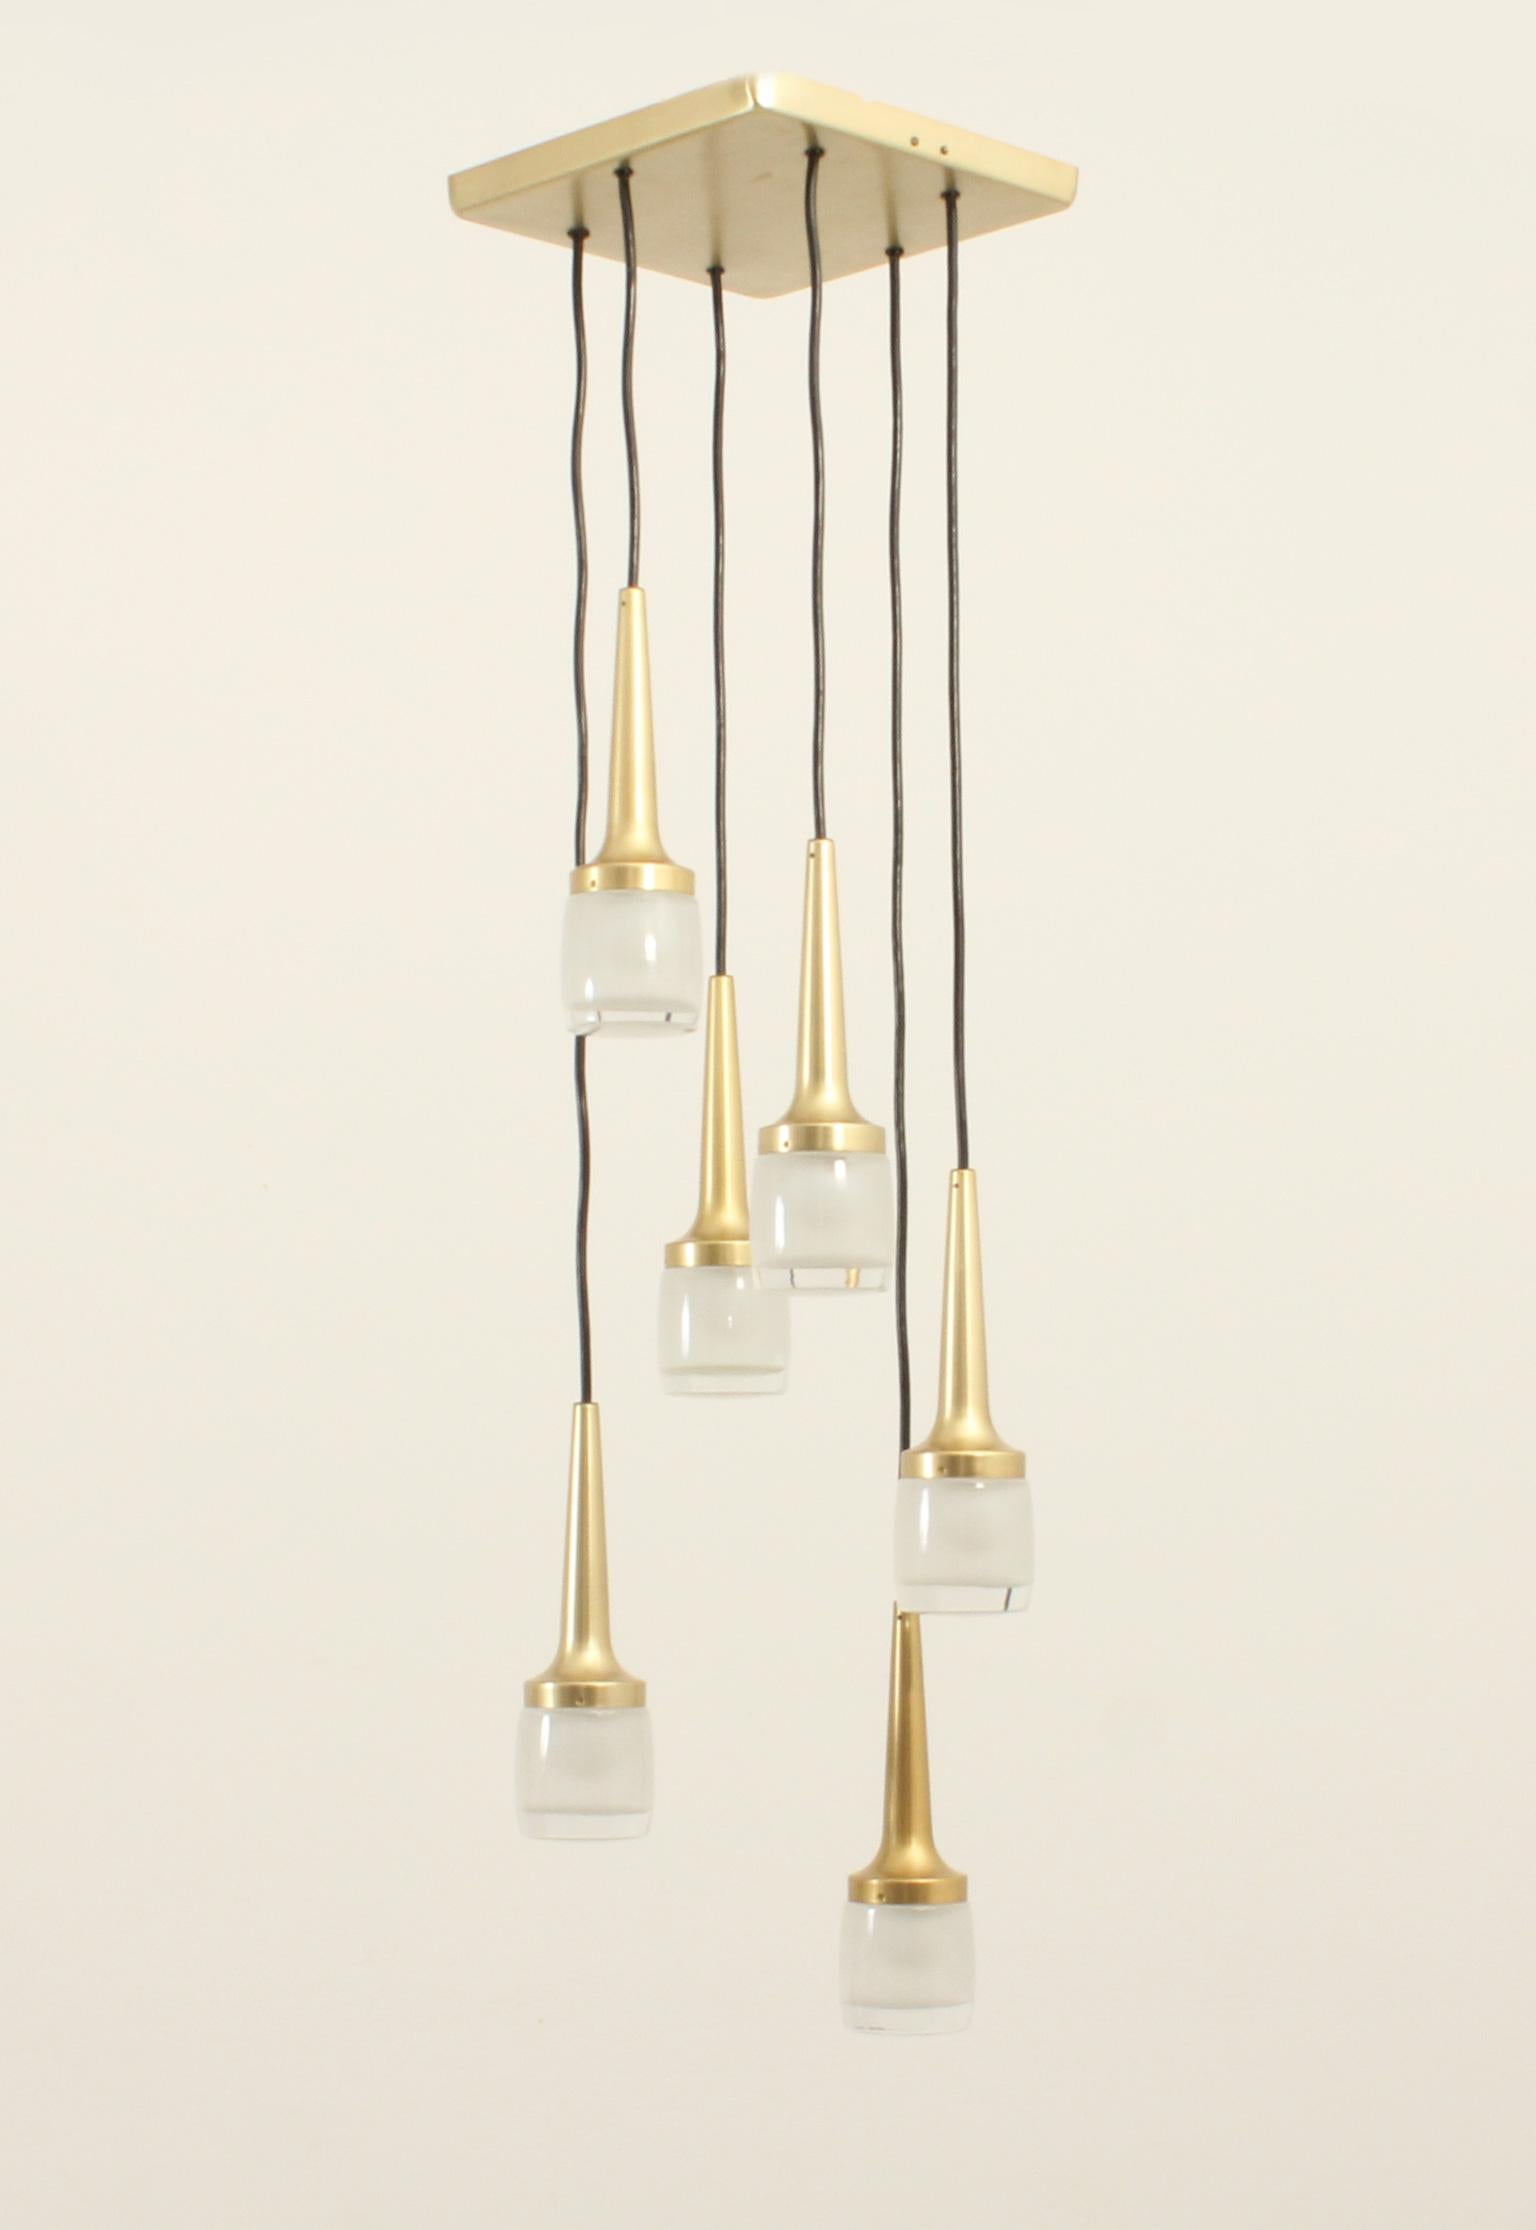 Large cascade model 9028/6 produced by Staff Leuchten in 1960's, Germany. Six lights fixtures in brassed aluminum with thick moulded glass reflectors. The wire can be adjusted in height.